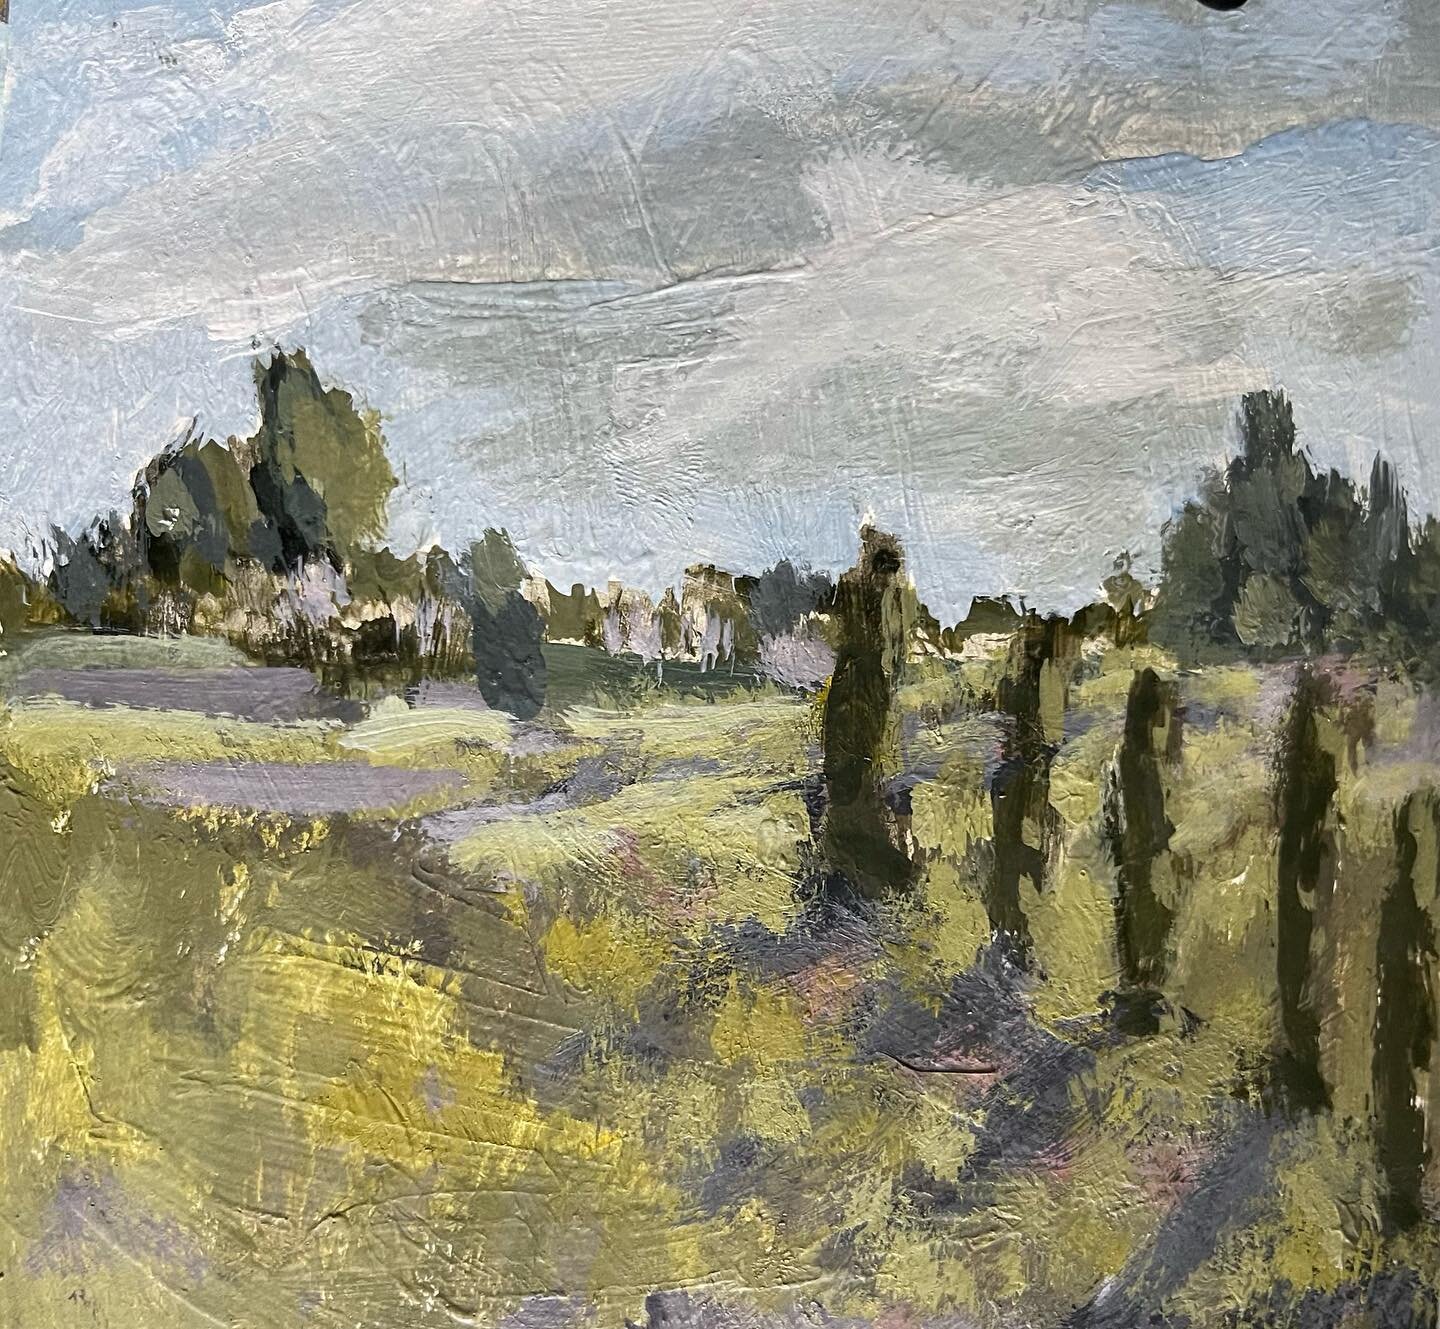 On a train trip to Paris I took photos of the landscapes I was passing through.  It made me miss painting in Plein air.  So today I painted a small study of the beauty around my area in Provence. 
Even though I love abstraction, and the freedom that 